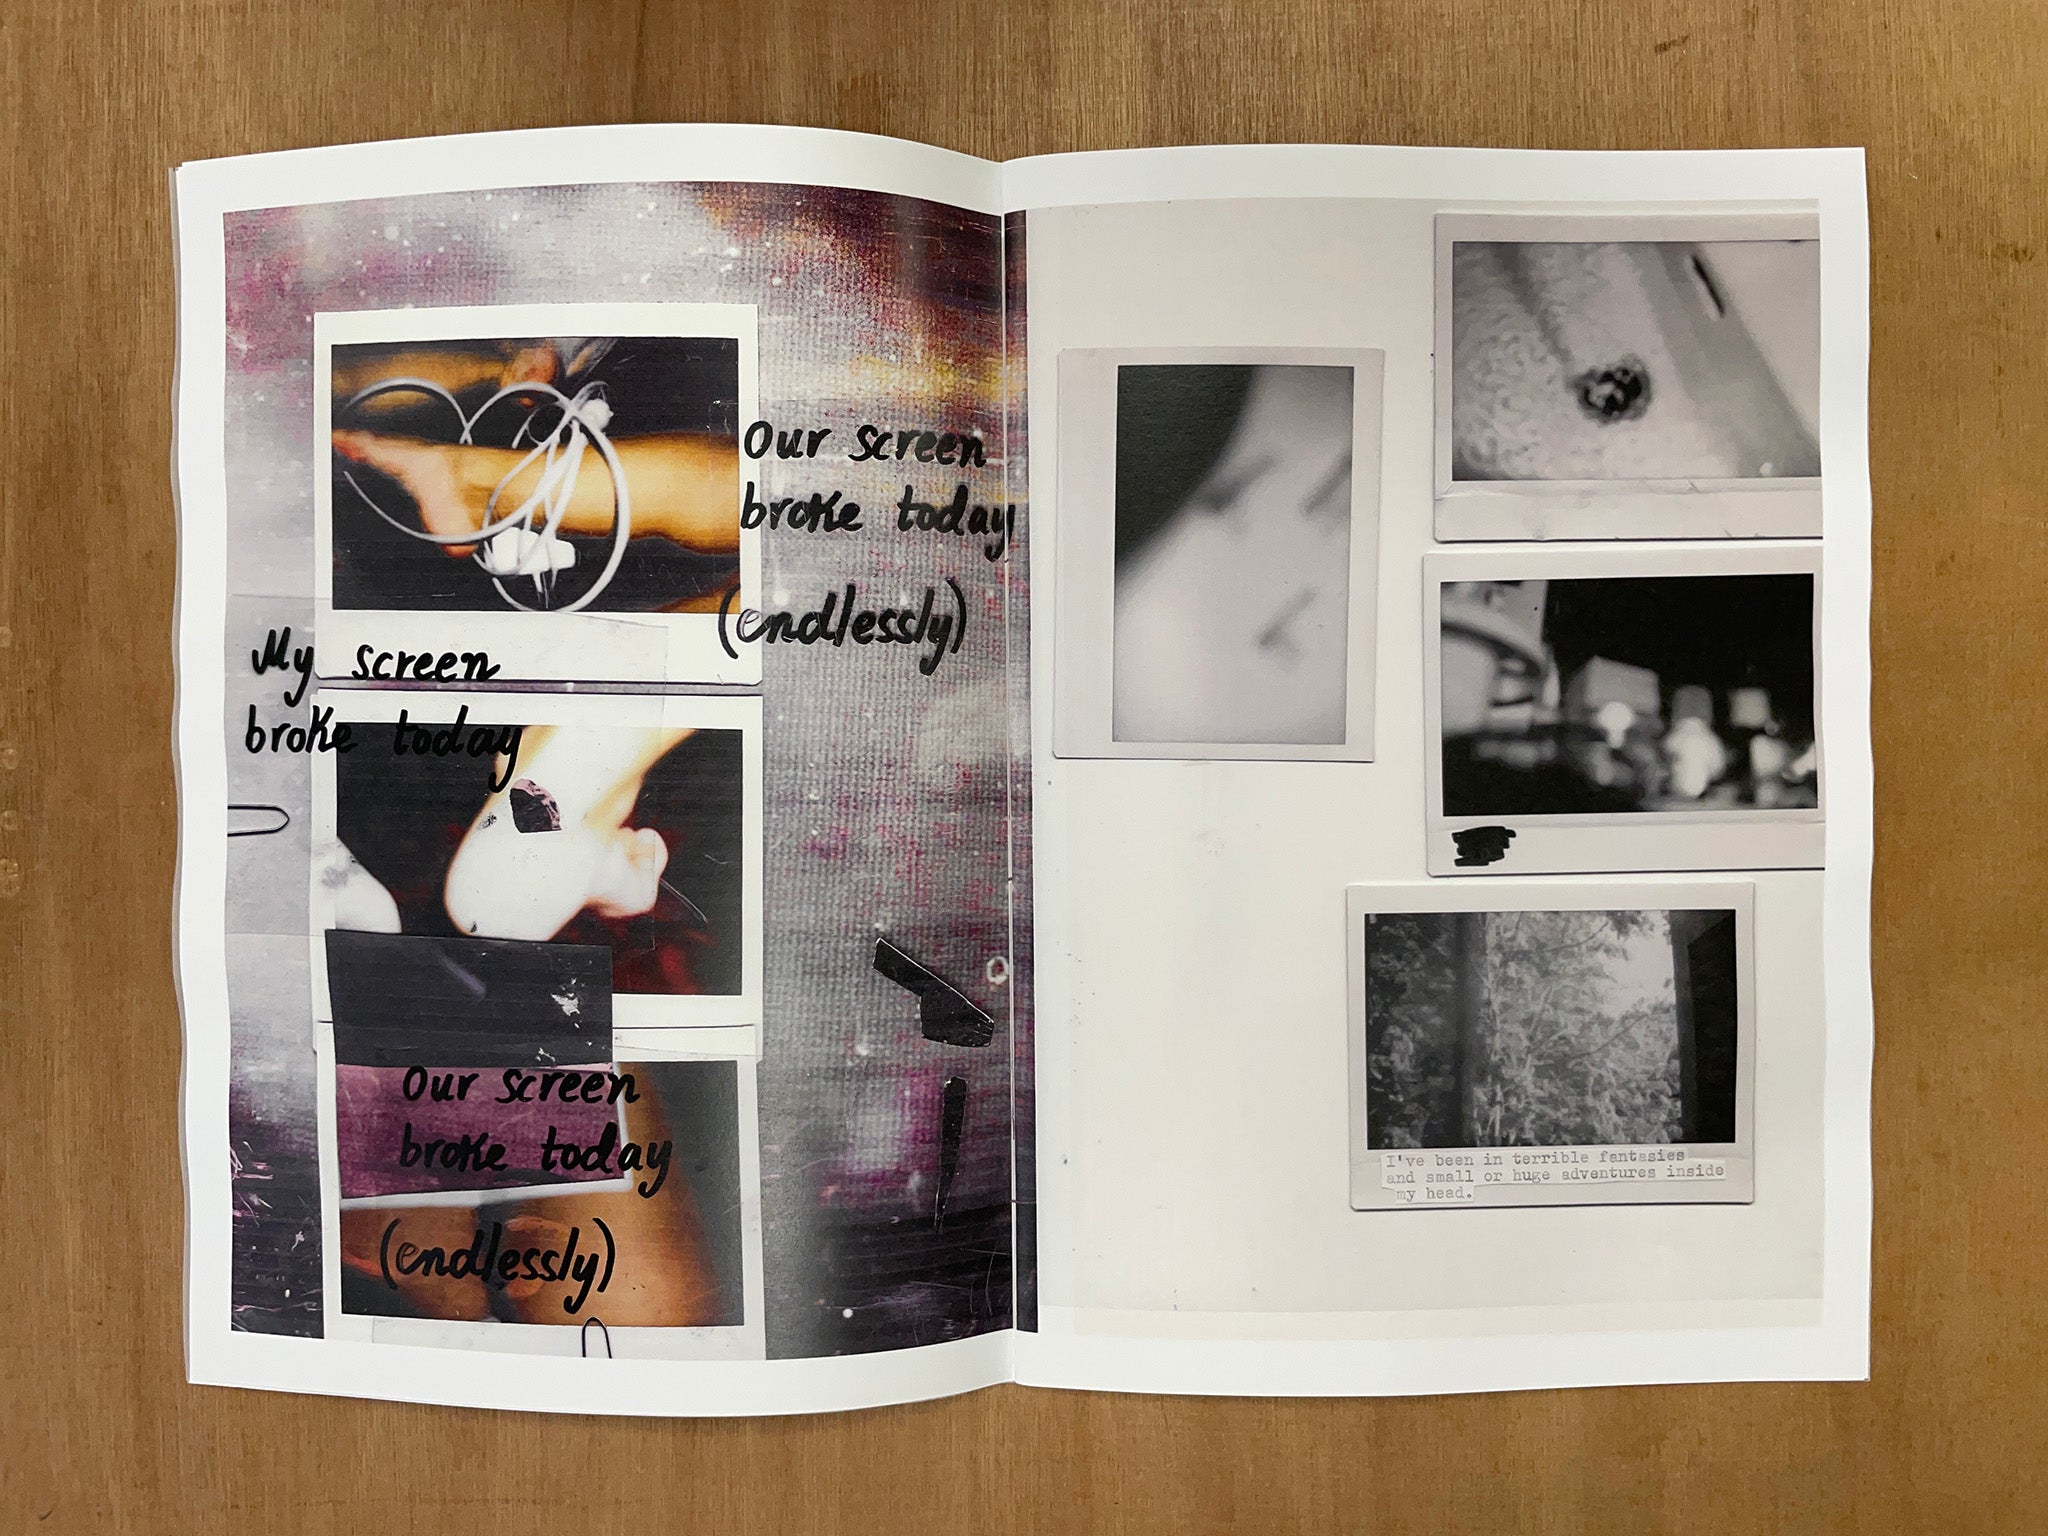 SCANNED DIARIES AND DALIDA SONGS by Eva Anerrapsi